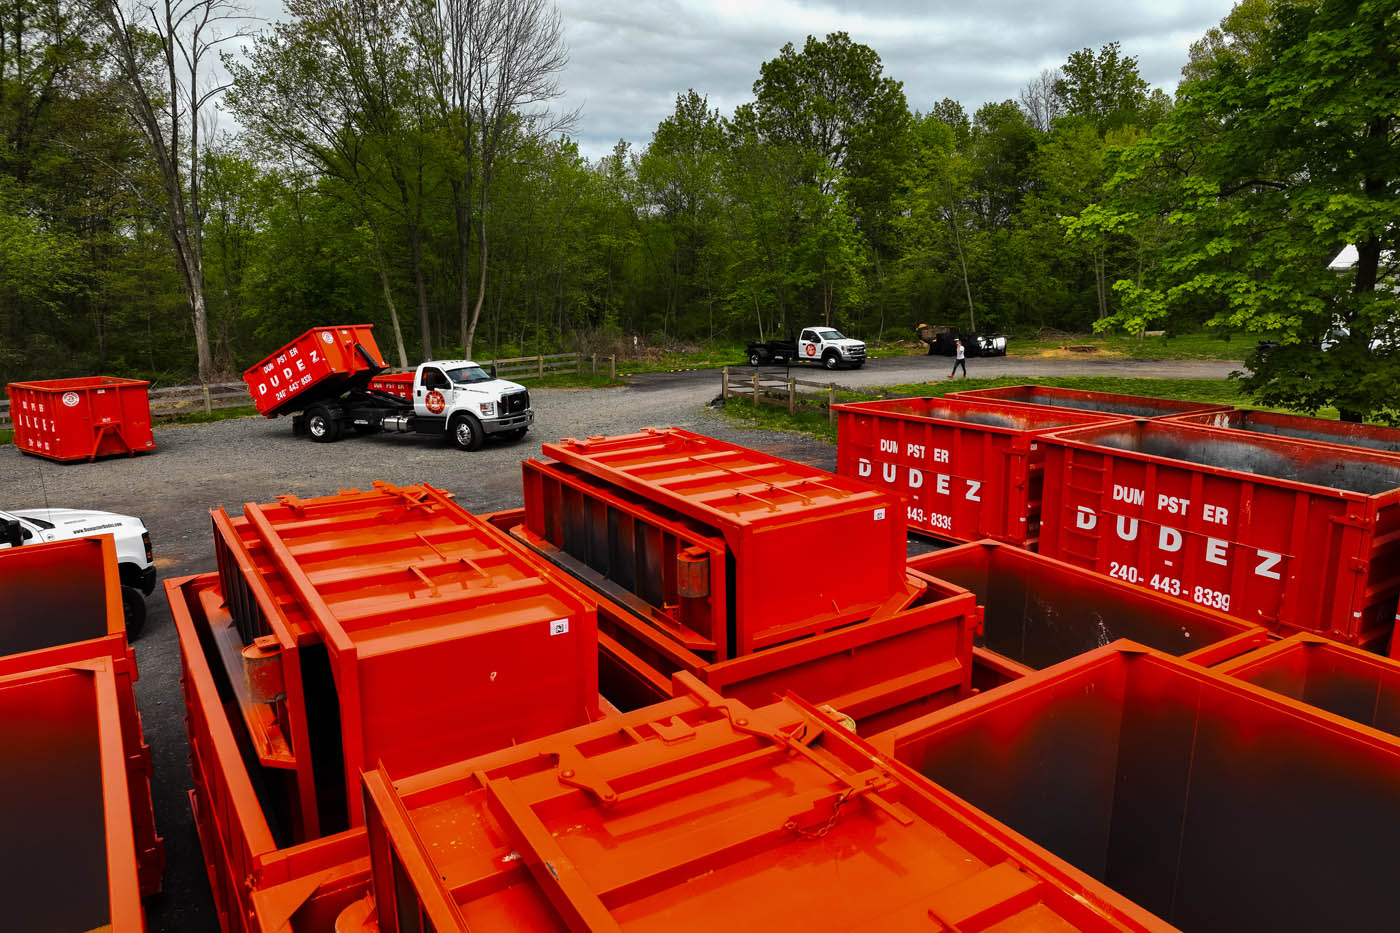 
				Dumpster Dudez trucks and storage lot for some of the best dumpster rental prices in Rochester, NY. 
			